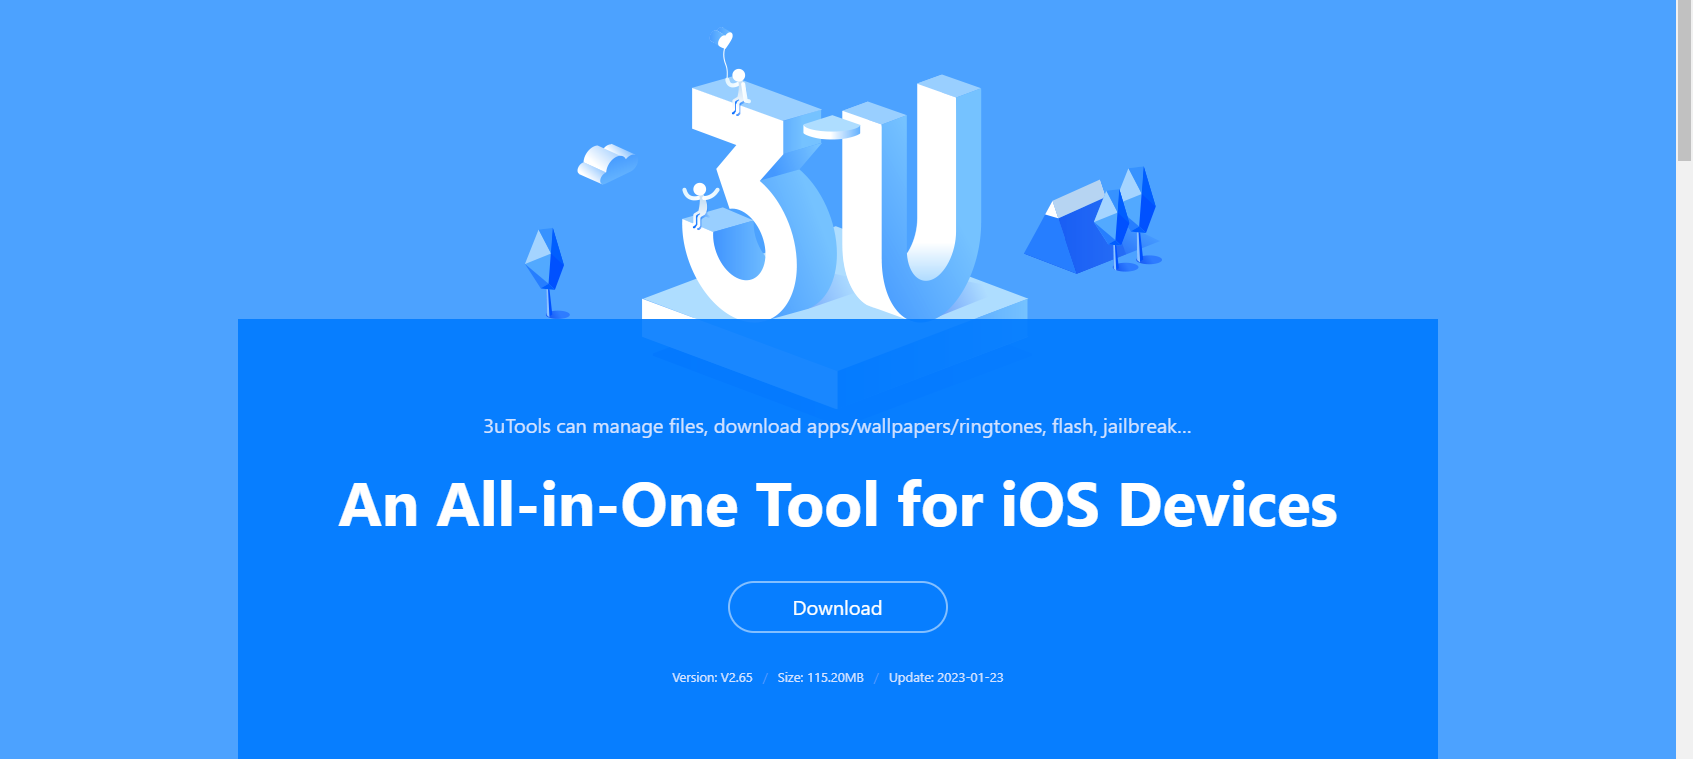 Download and Install 3uTools